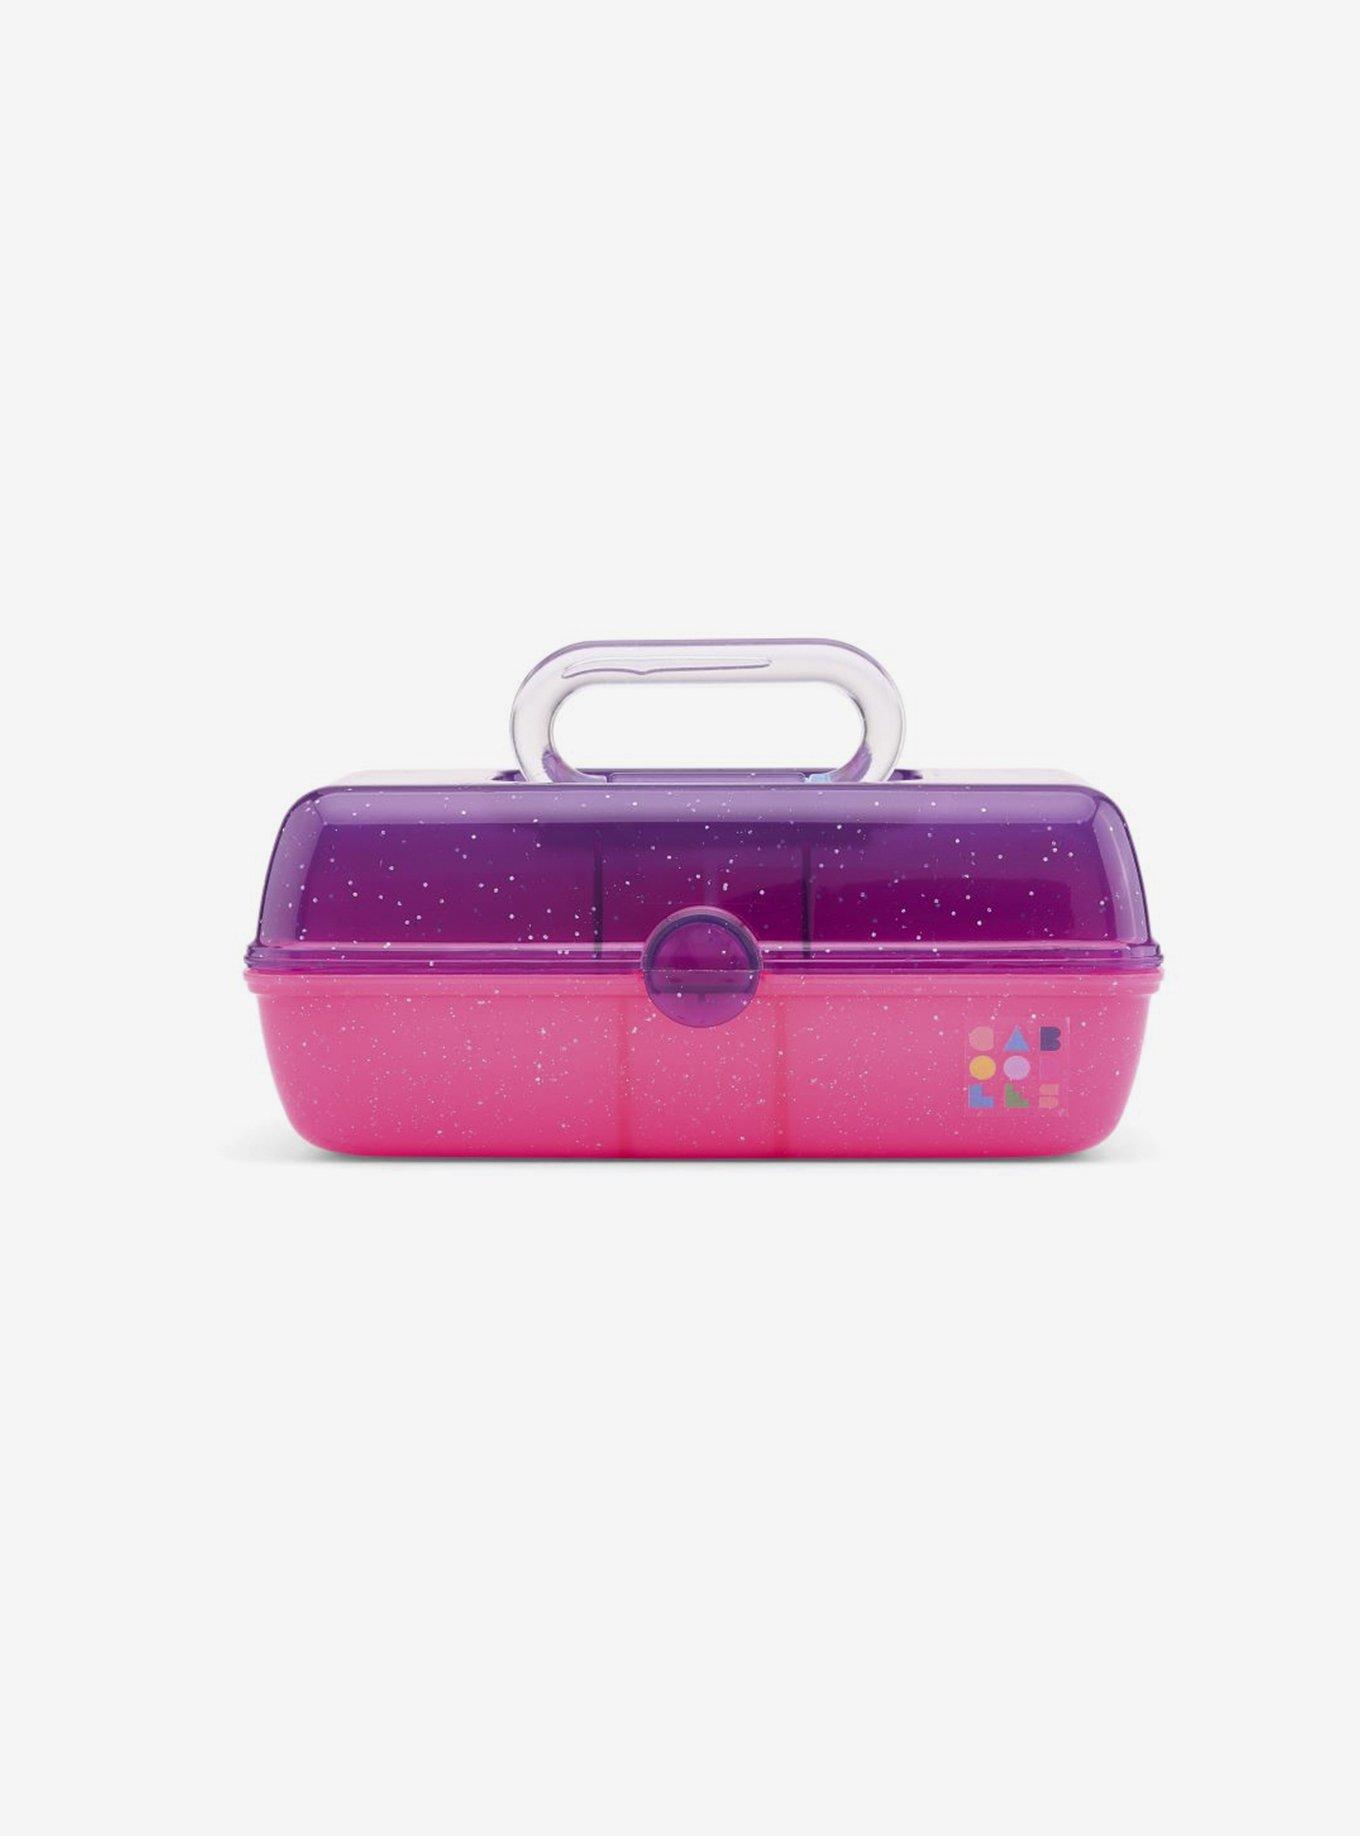 Caboodles Make Me Over Pop-Up Makeup Cosmetic Train Case 